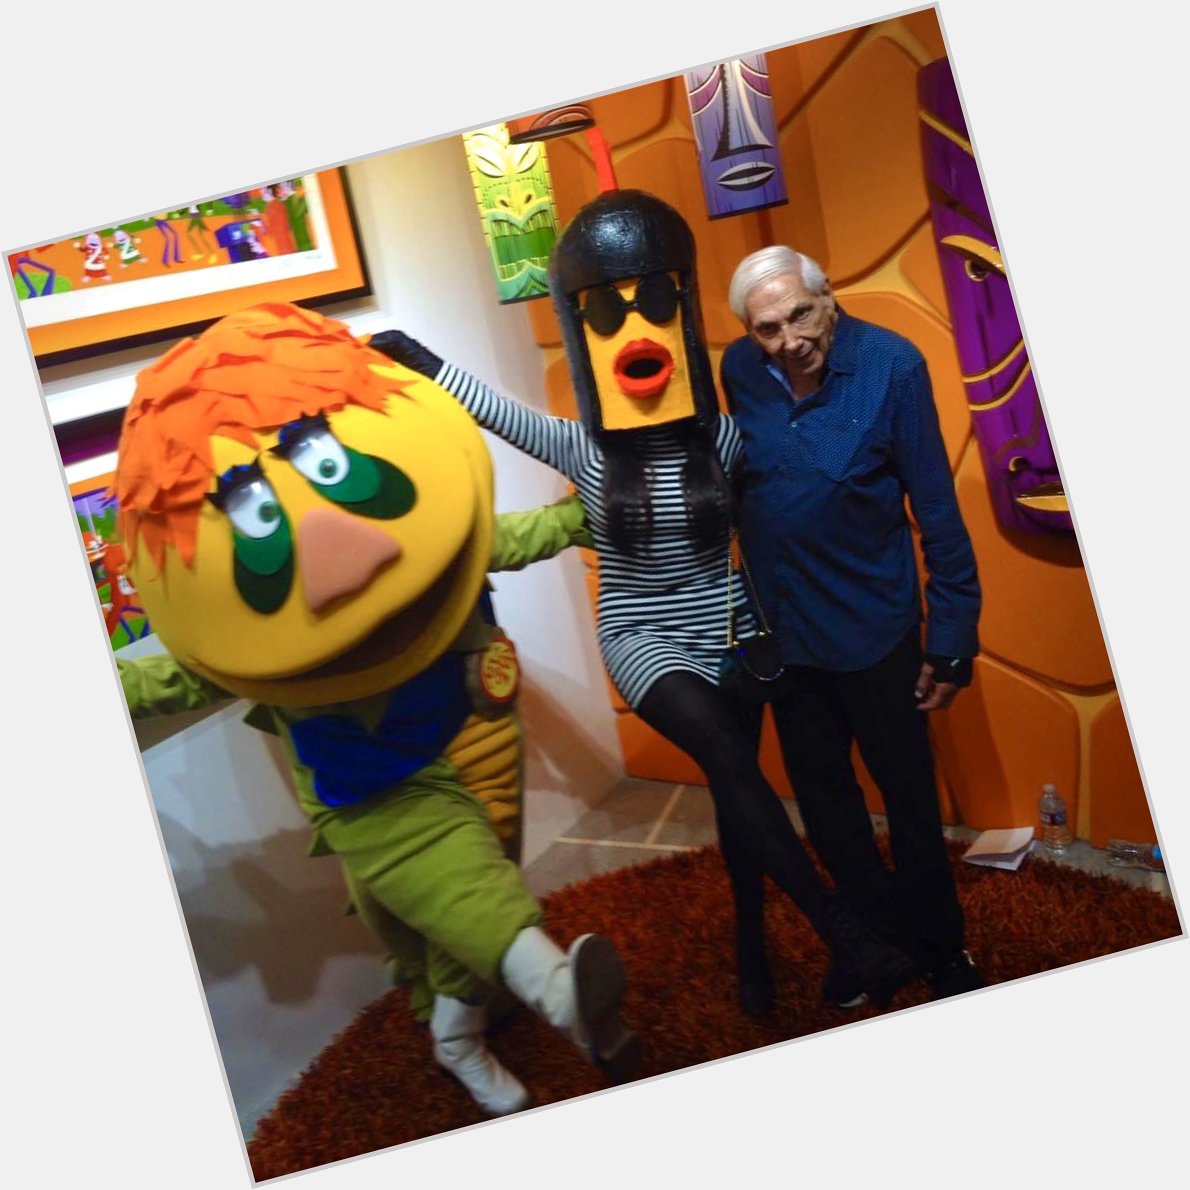 Wishing a Happy Birthday to Marty Krofft of 